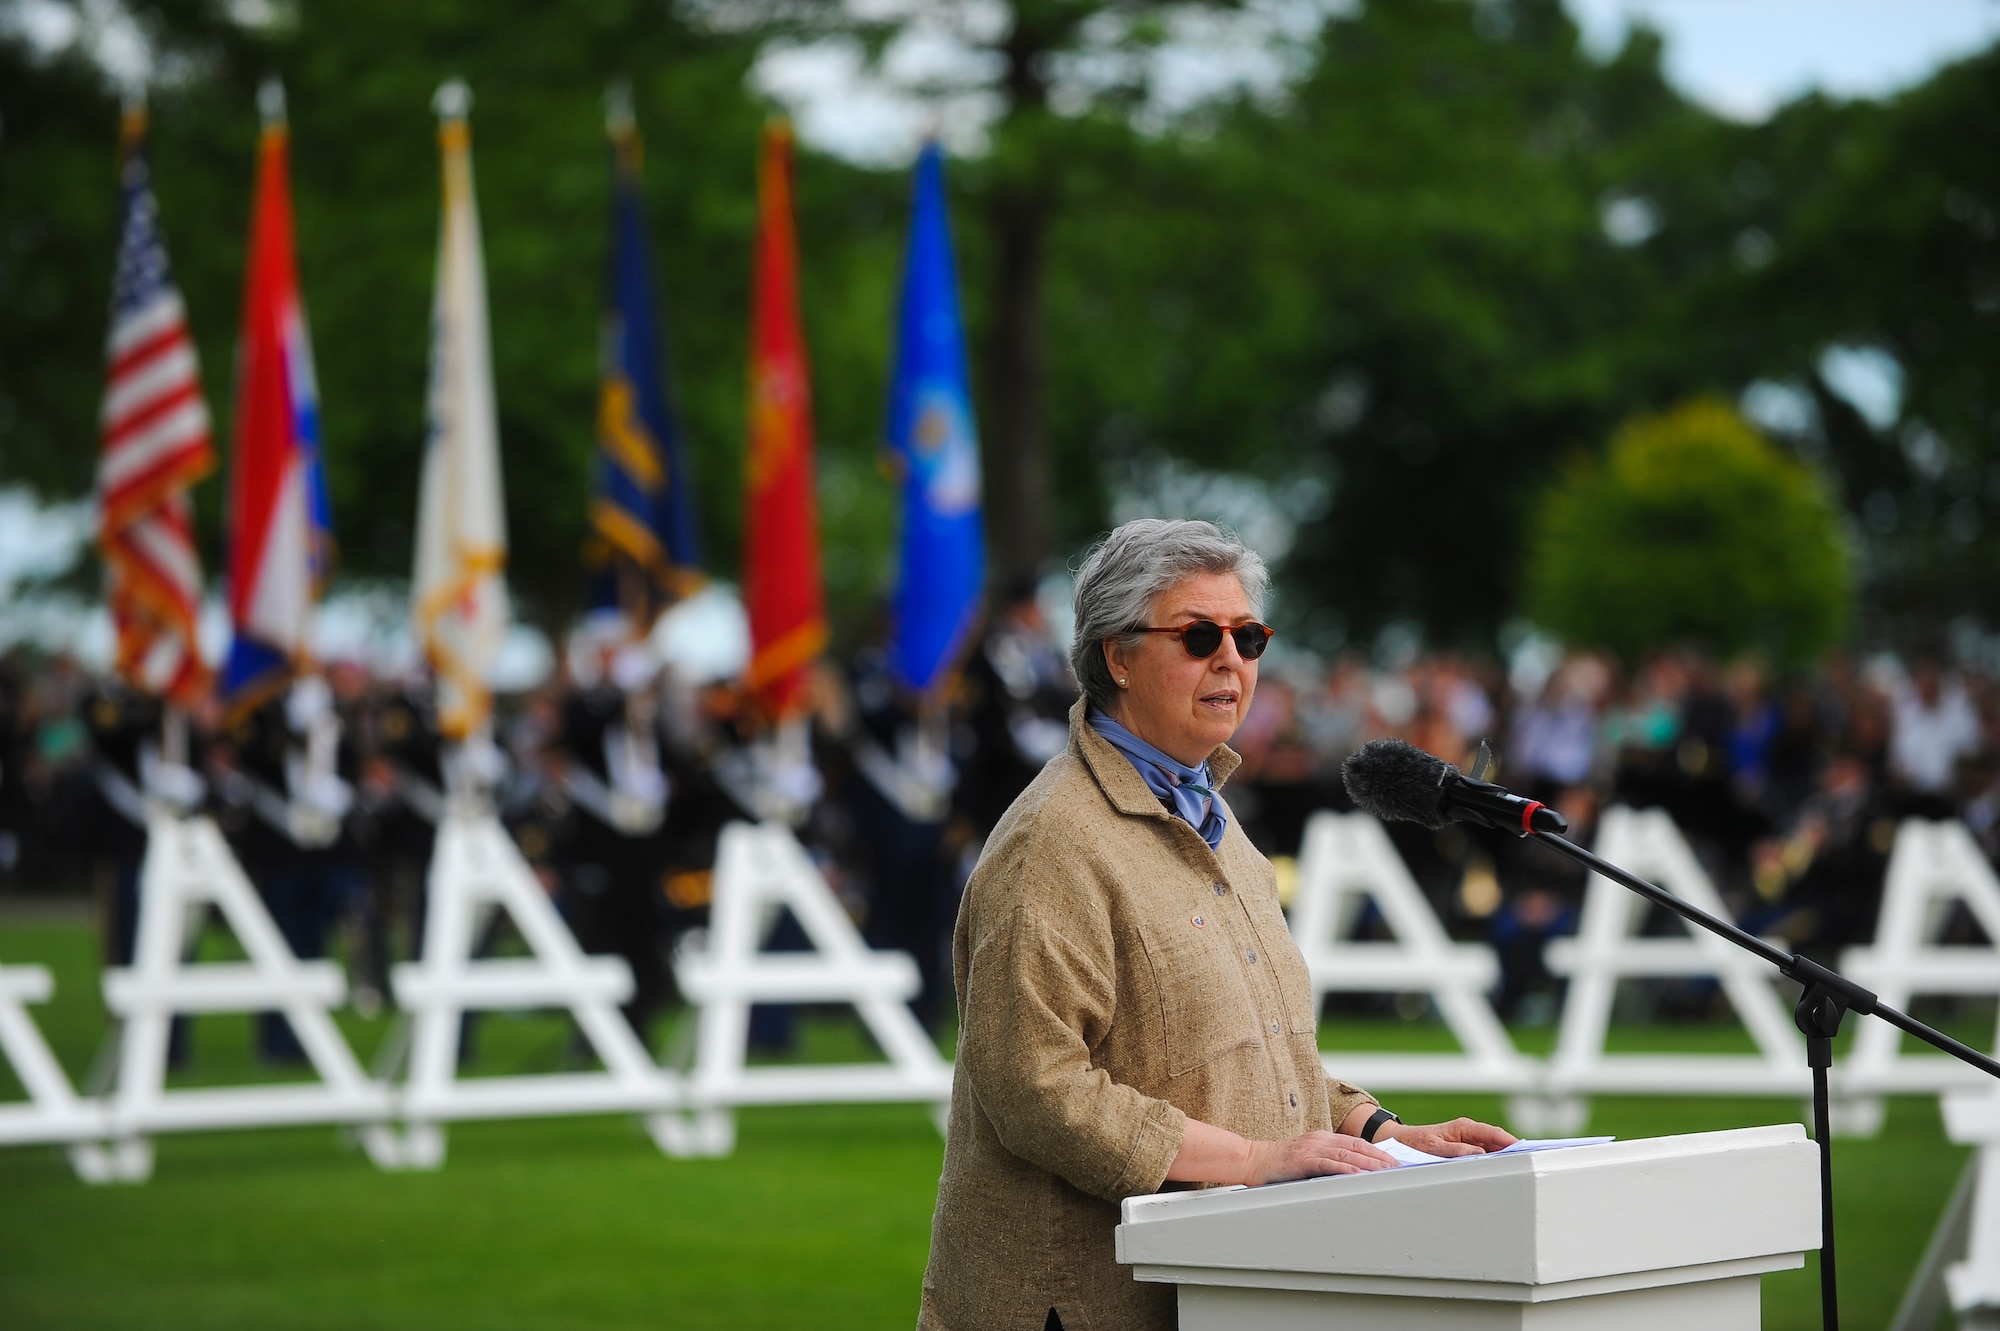 Anne Roosevelt, granddaughter of former U.S. President Franklin Roosevelt and board chair for the Roosevelt Institute, speaks during a Memorial Day ceremony at the Netherlands American Cemetery May 25, 2014, Margraten, Netherlands. Roosevelt was one of the many guest speakers at the ceremony. (U.S. Air Force photo by Senior Airman Rusty Frank/Released)